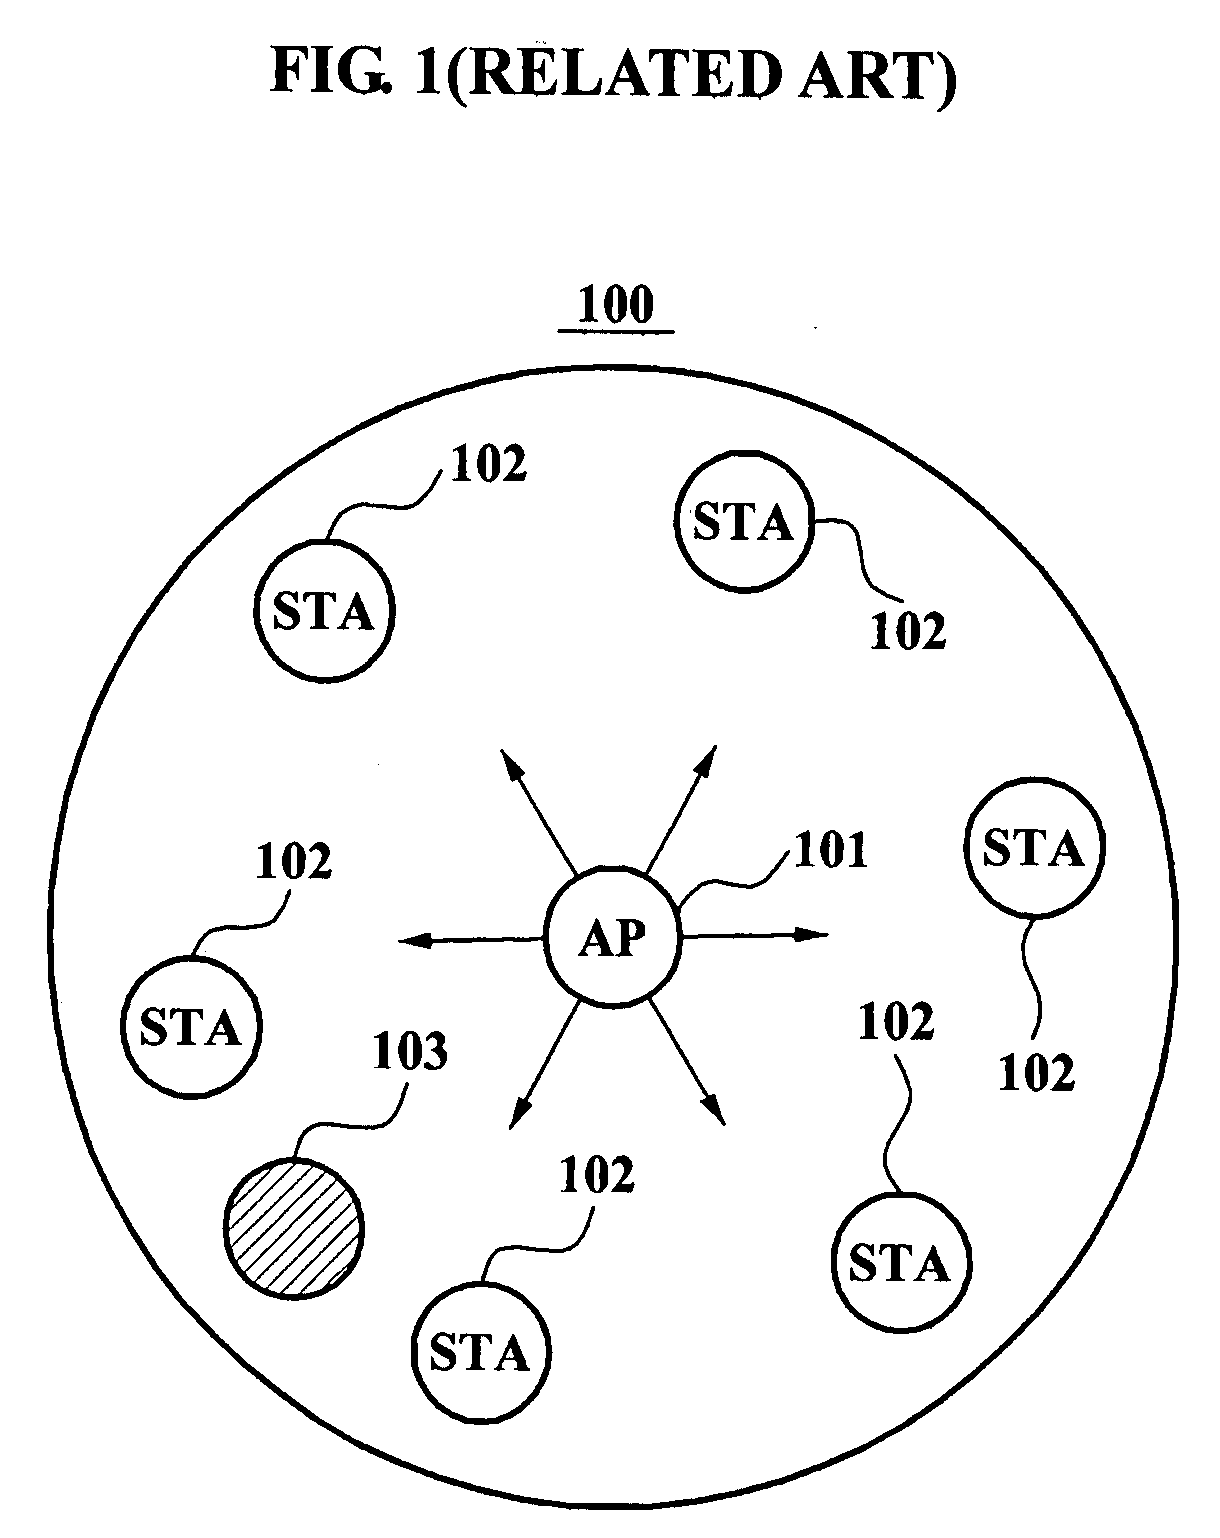 Method of protecting broadcast frame, terminal authenticating broadcast frame, and access point broadcasting broadcast frame